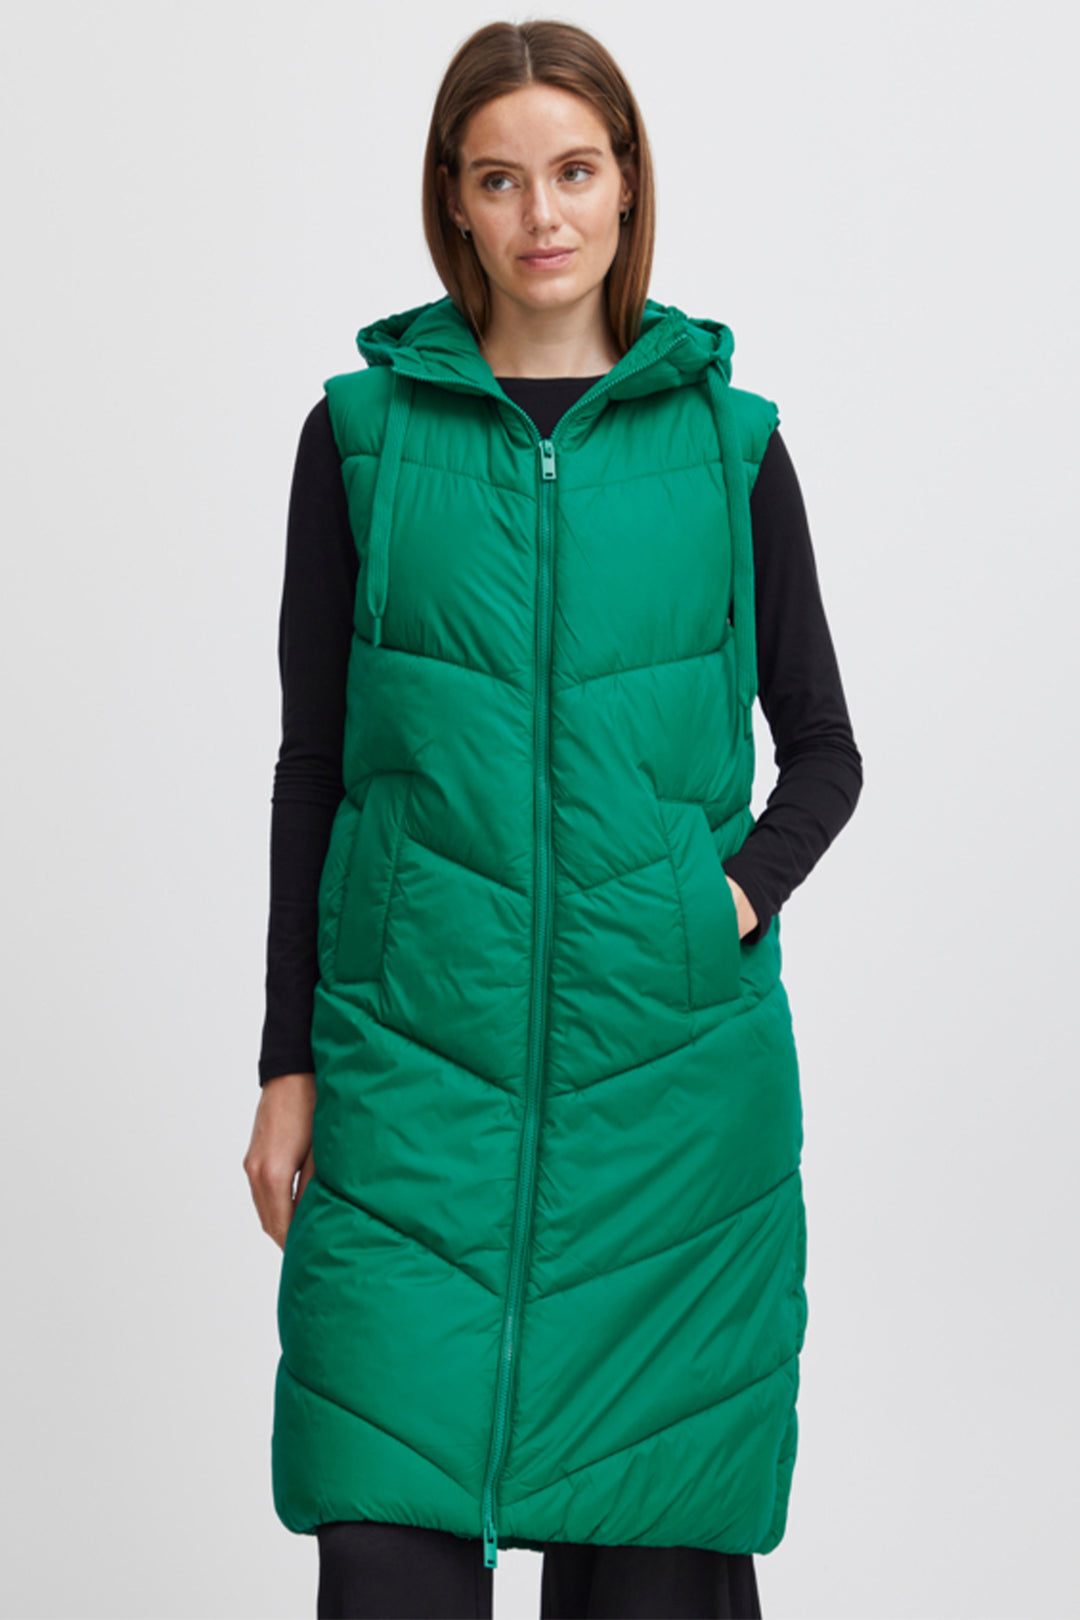 Crafted from a soft woven fabric and featuring a regular fit, sleeveless design, drawstring hood and a below the knee full front zip, this vest is sure to provide comfort and protection.